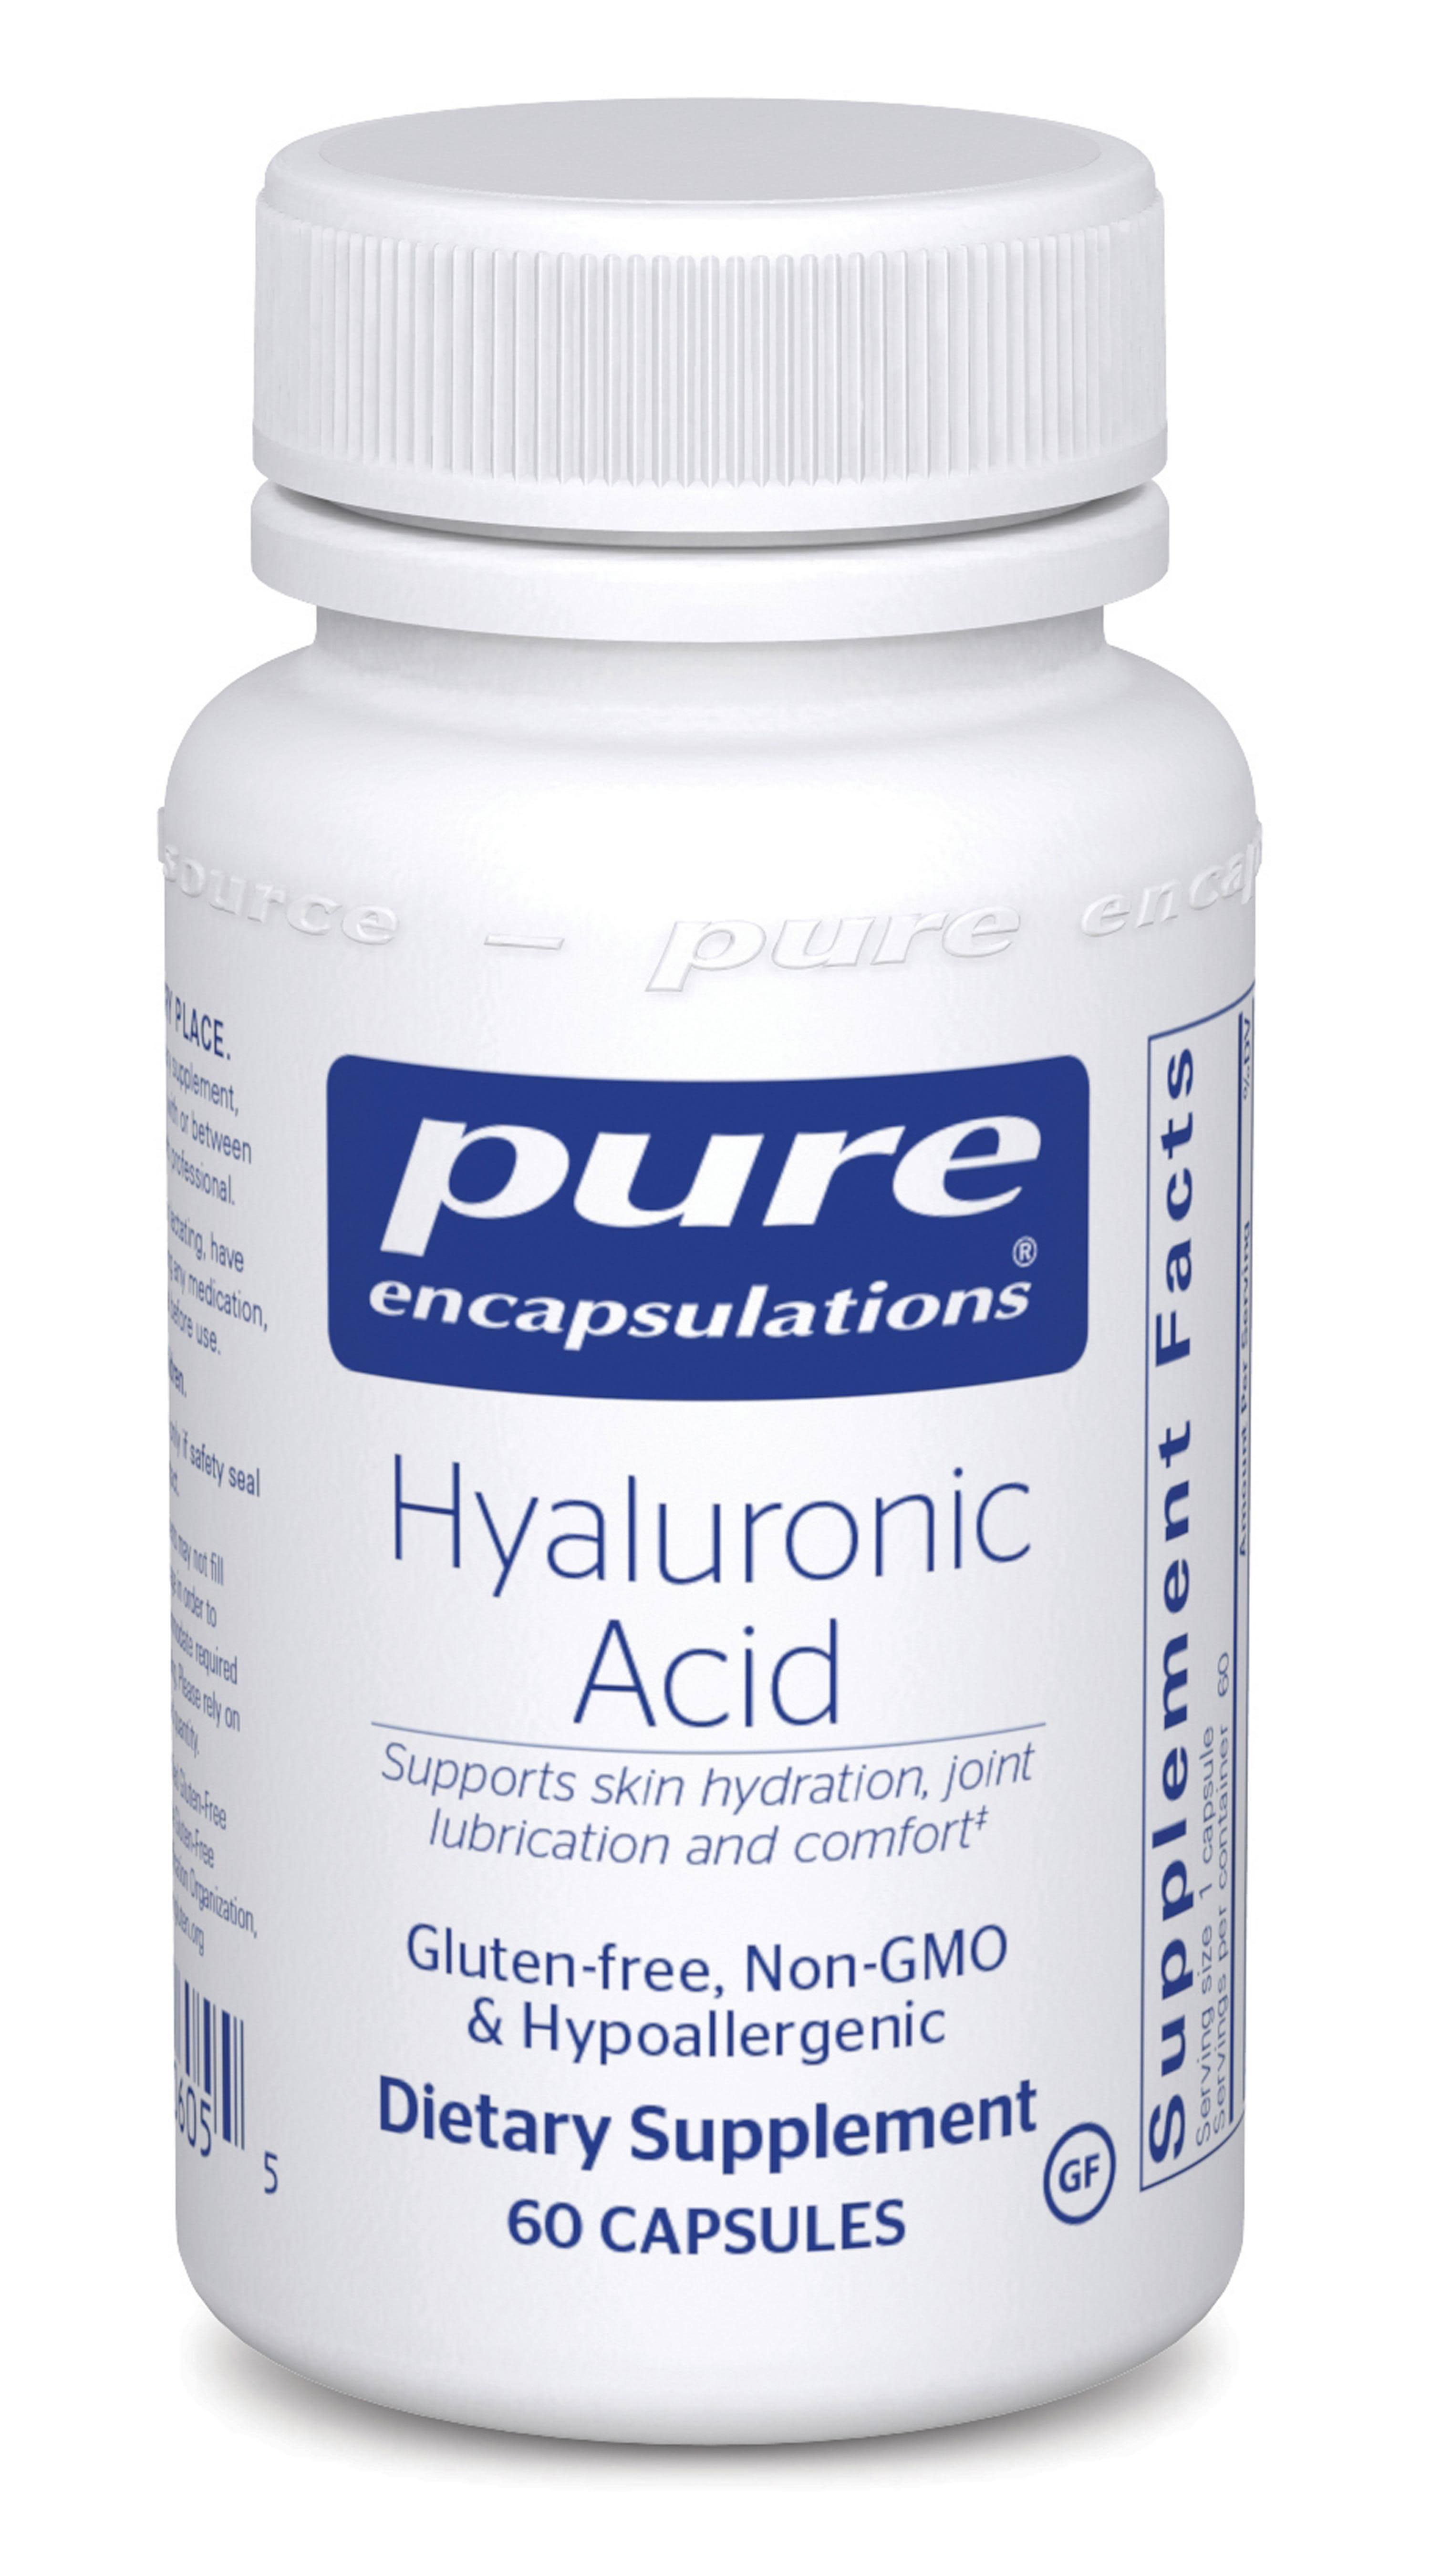 Pure Encapsulations Hyaluronic Acid 70 Mg - 60 Capsules